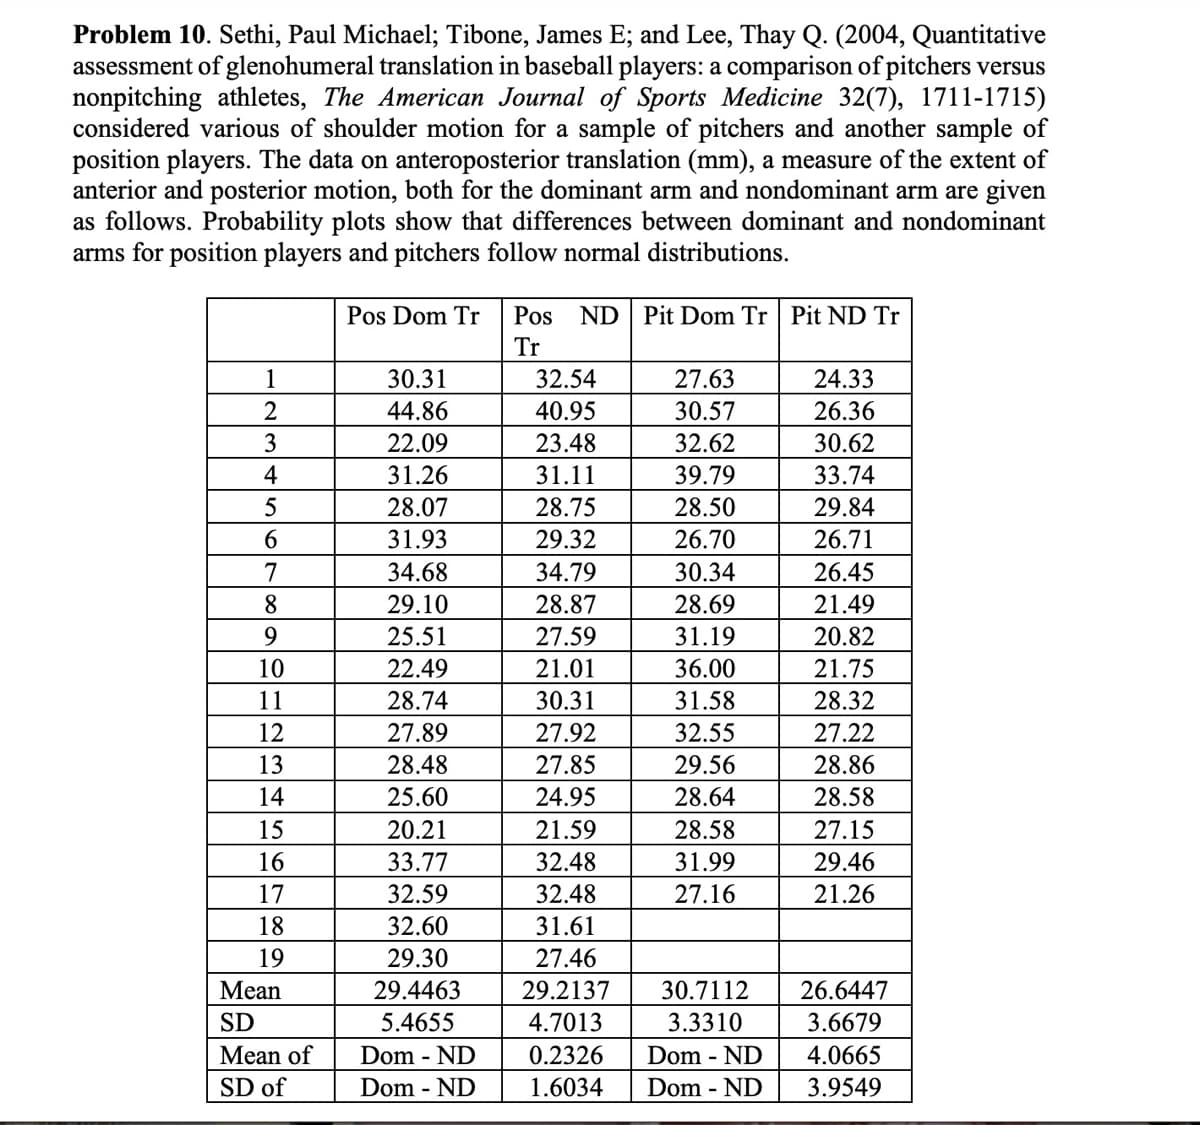 Problem 10. Sethi, Paul Michael; Tibone, James E; and Lee, Thay Q. (2004, Quantitative
assessment of glenohumeral translation in baseball players: a comparison of pitchers versus
nonpitching athletes, The American Journal of Sports Medicine 32(7), 1711-1715)
considered various of shoulder motion for a sample of pitchers and another sample of
position players. The data on anteroposterior translation (mm), a measure of the extent of
anterior and posterior motion, both for the dominant arm and nondominant arm are given
as follows. Probability plots show that differences between dominant and nondominant
arms for position players and pitchers follow normal distributions.
Pos Dom Tr
Pos ND Pit Dom Tr Pit ND Tr
Tr
1
30.31
32.54
27.63
24.33
2
44.86
40.95
30.57
26.36
3
22.09
23.48
32.62
30.62
4
31.26
31.11
39.79
33.74
5
28.07
28.75
28.50
29.84
6
31.93
29.32
26.70
26.71
7
34.68
34.79
30.34
26.45
8
29.10
28.87
28.69
21.49
9
25.51
27.59
31.19
20.82
10
22.49
21.01
36.00
21.75
11
28.74
30.31
31.58
28.32
12
27.89
27.92
32.55
27.22
13
28.48
27.85
29.56
28.86
14
25.60
24.95
28.64
28.58
15
20.21
21.59
28.58
27.15
16
33.77
32.48
31.99
29.46
17
32.59
32.48
27.16
21.26
18
32.60
31.61
19
29.30
27.46
Mean
29.4463
29.2137
30.7112
26.6447
SD
5.4655
4.7013
3.3310
3.6679
Mean of
Dom - ND
0.2326
Dom - ND
4.0665
SD of
Dom - ND
1.6034
Dom - ND
3.9549